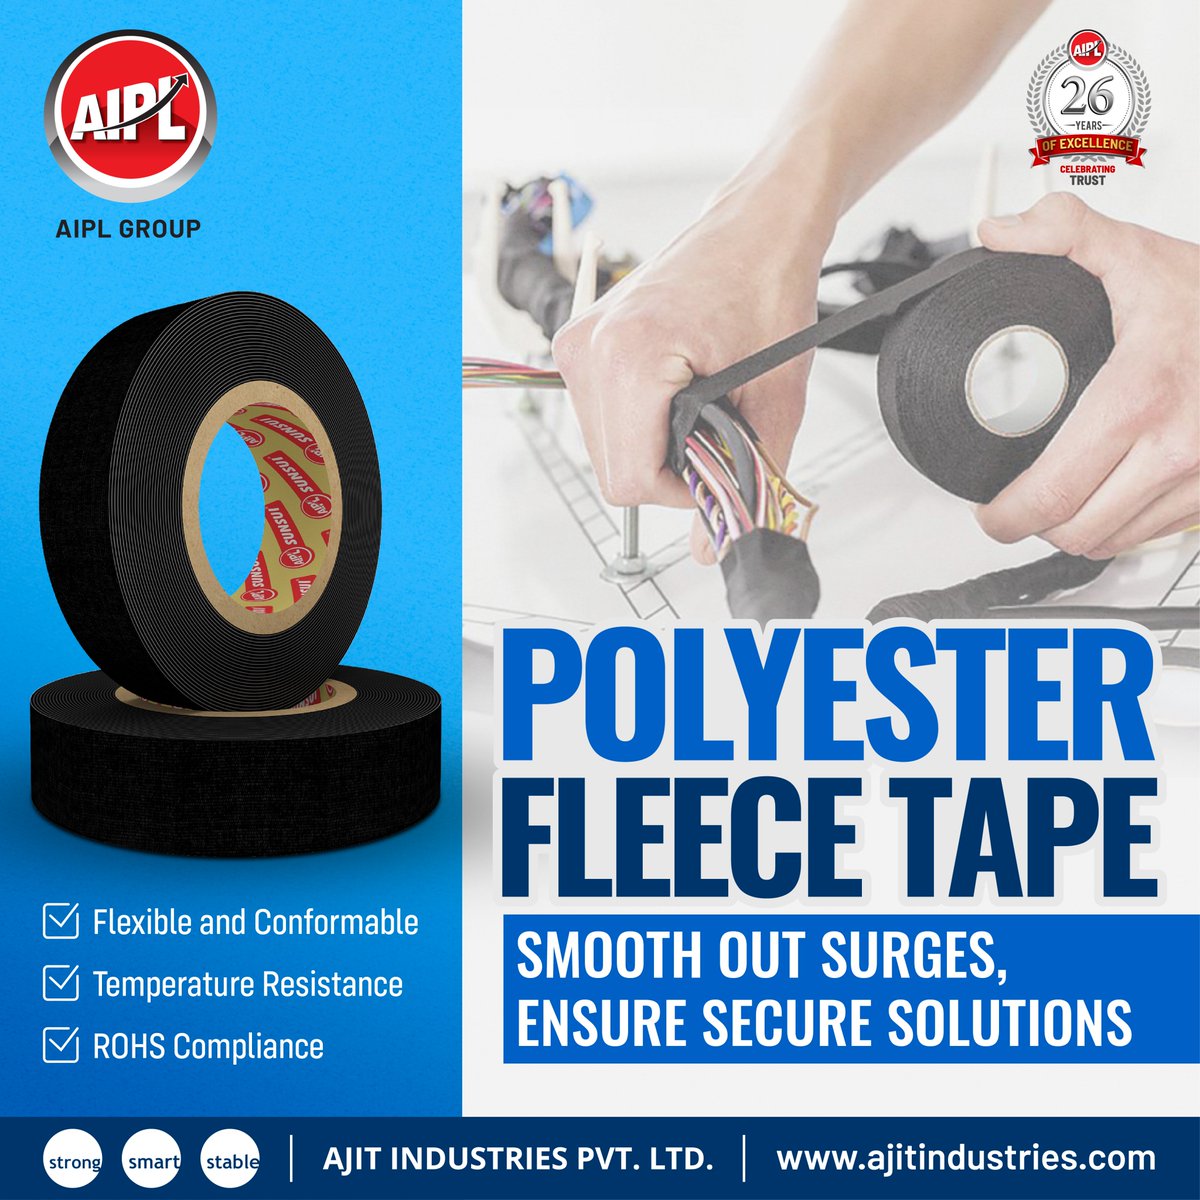 Designed for superior insulation and protection, our tape ensures your appliances run efficiently and last longer.

#AIPLGroup #AIPL #Ajitindustries #Wires #Adhesive #Adhesivetape #WhiteGoodsInnovation #DurableDesign #PolyesterFleece #EfficiencyInEveryThread